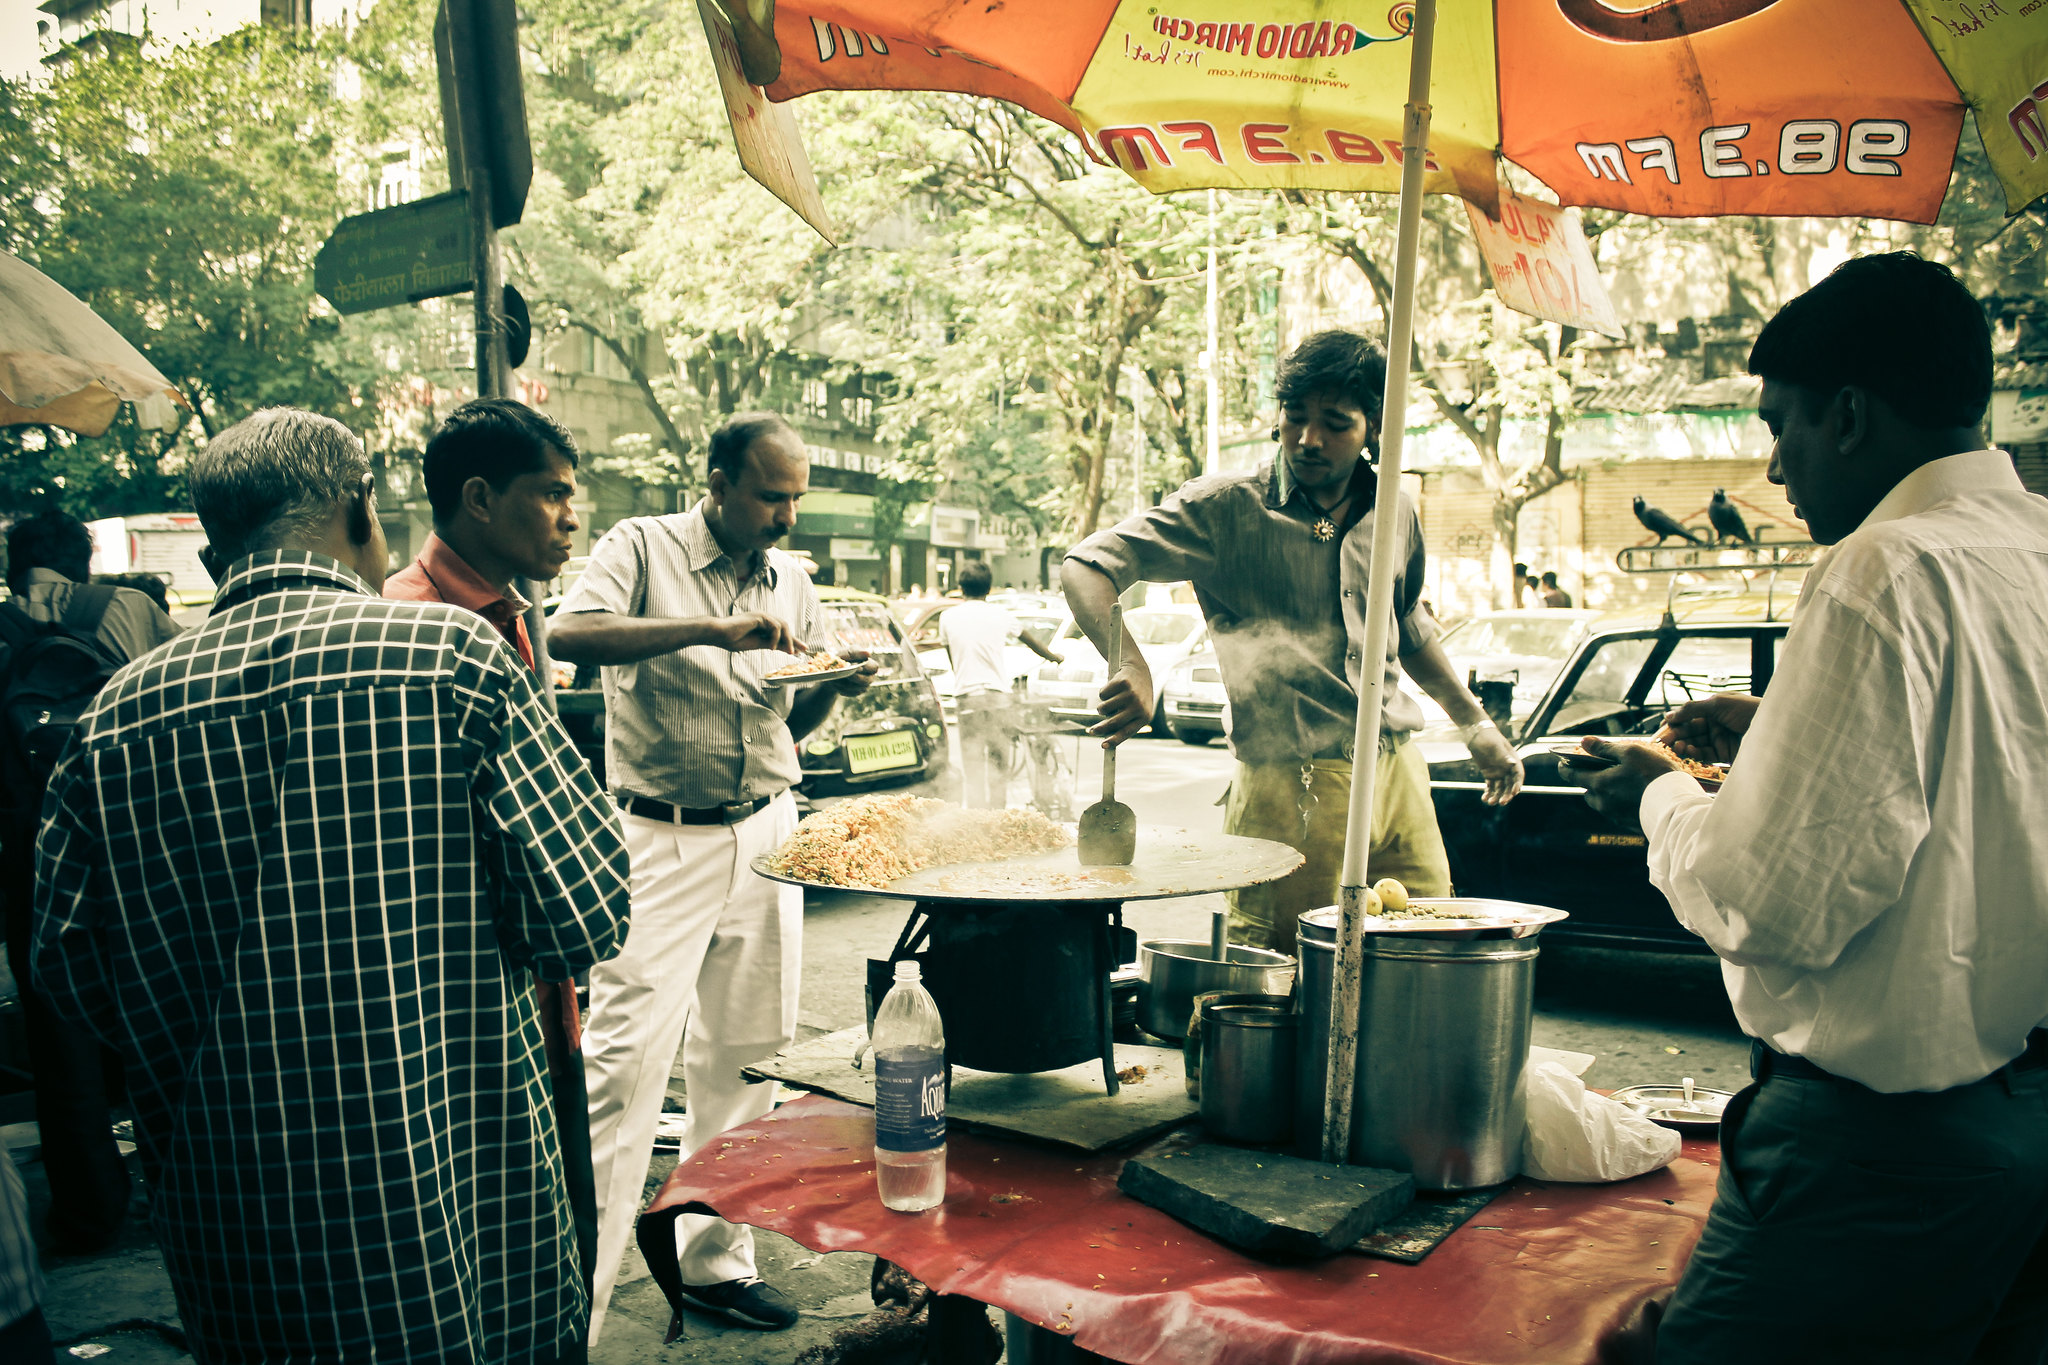 Street food caters to a wide variety of population of the city, Image Source: Flickr